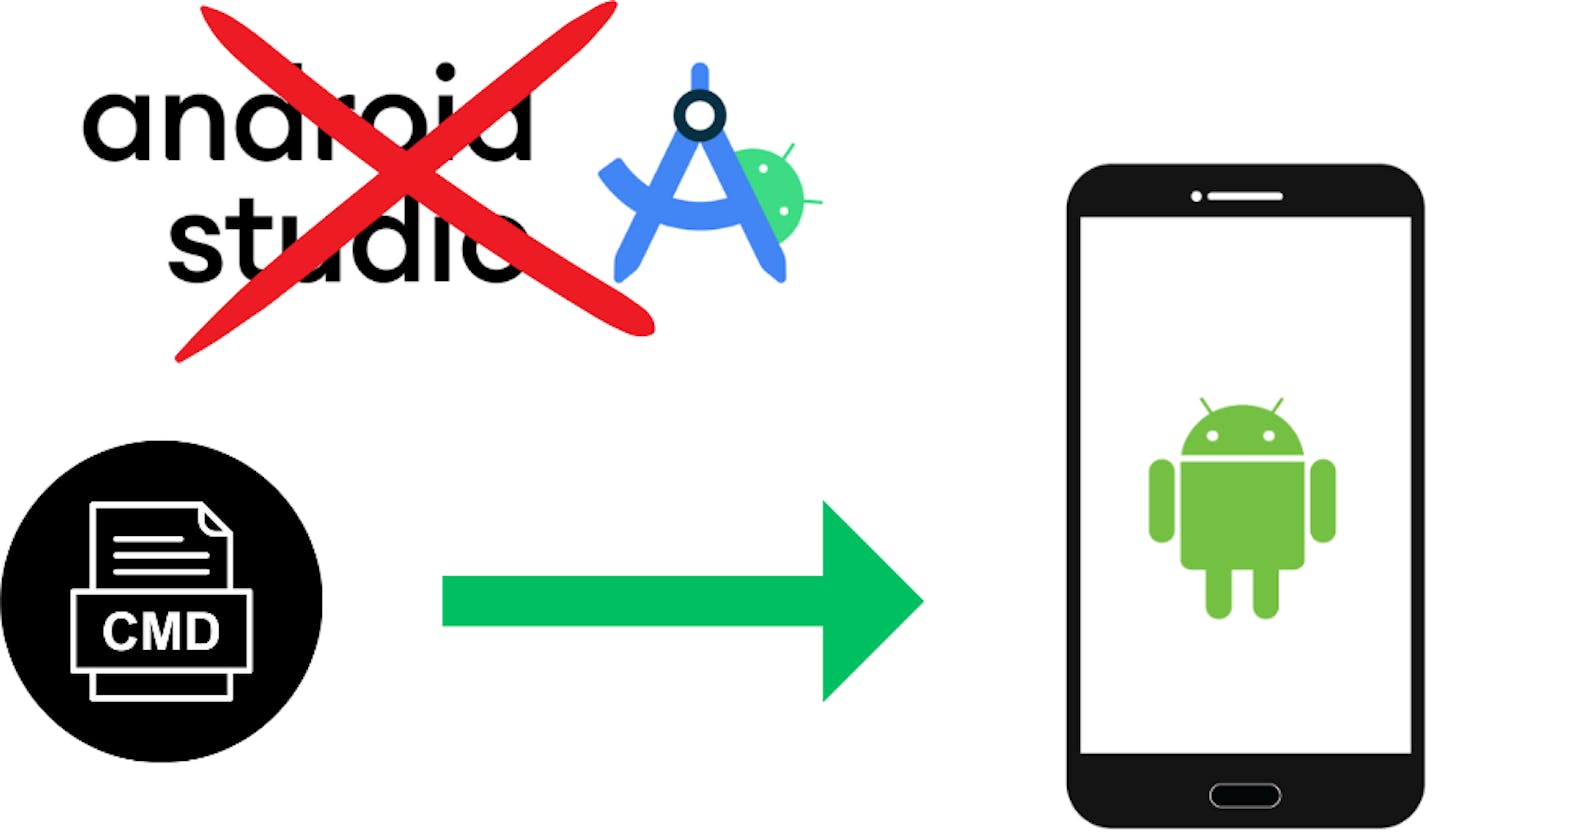 How to open Android Emulator from CMD